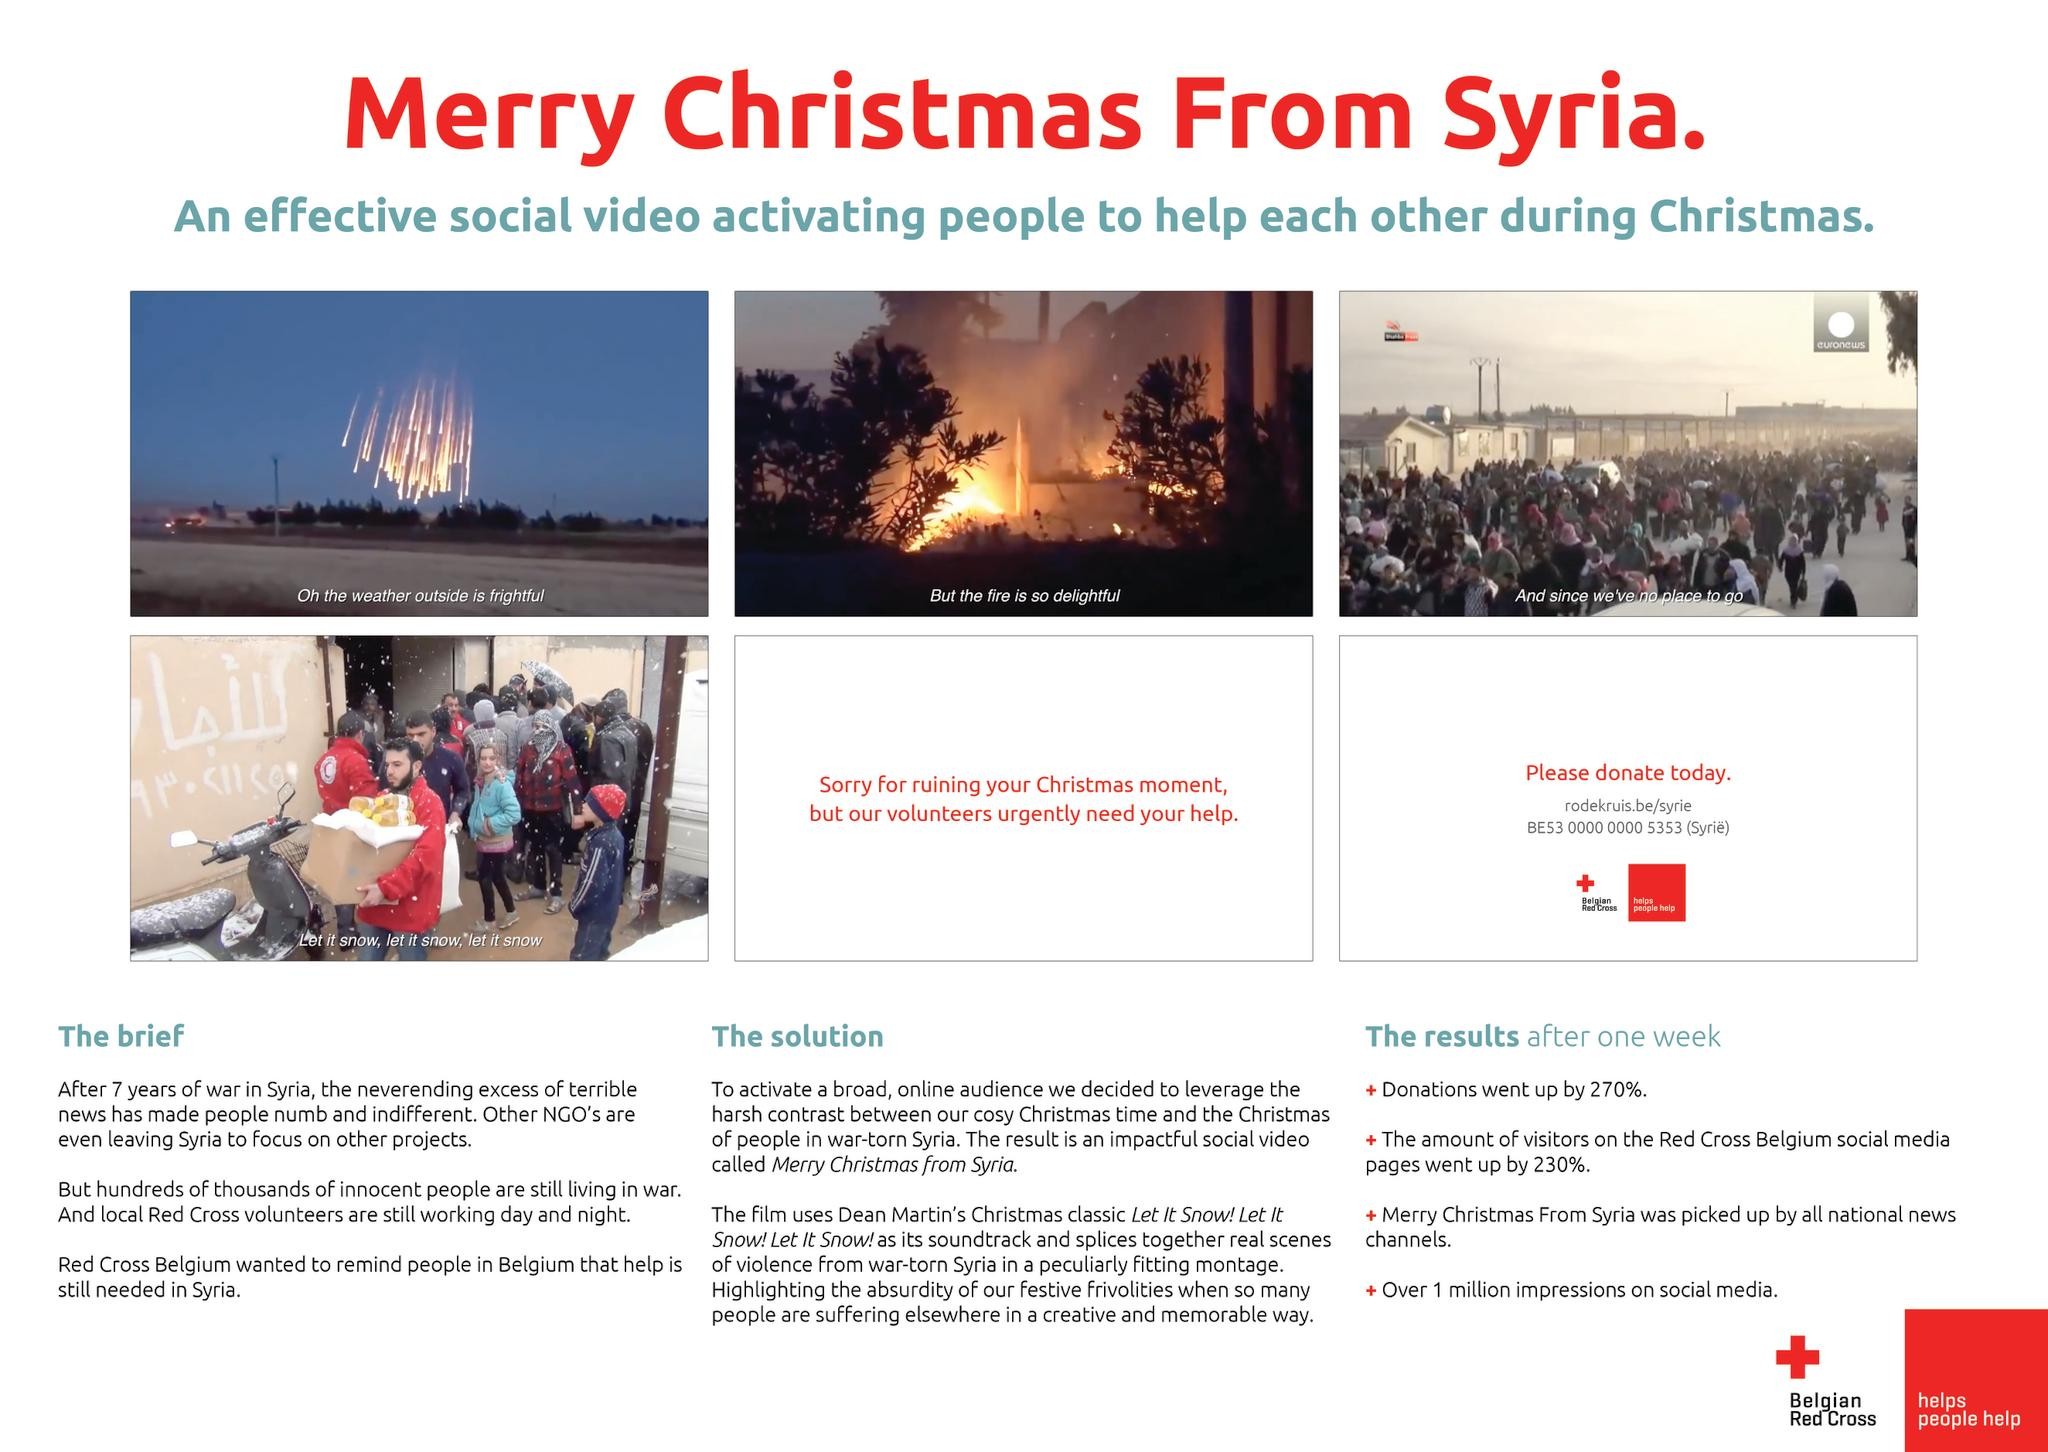 Merry Christmas from Syria